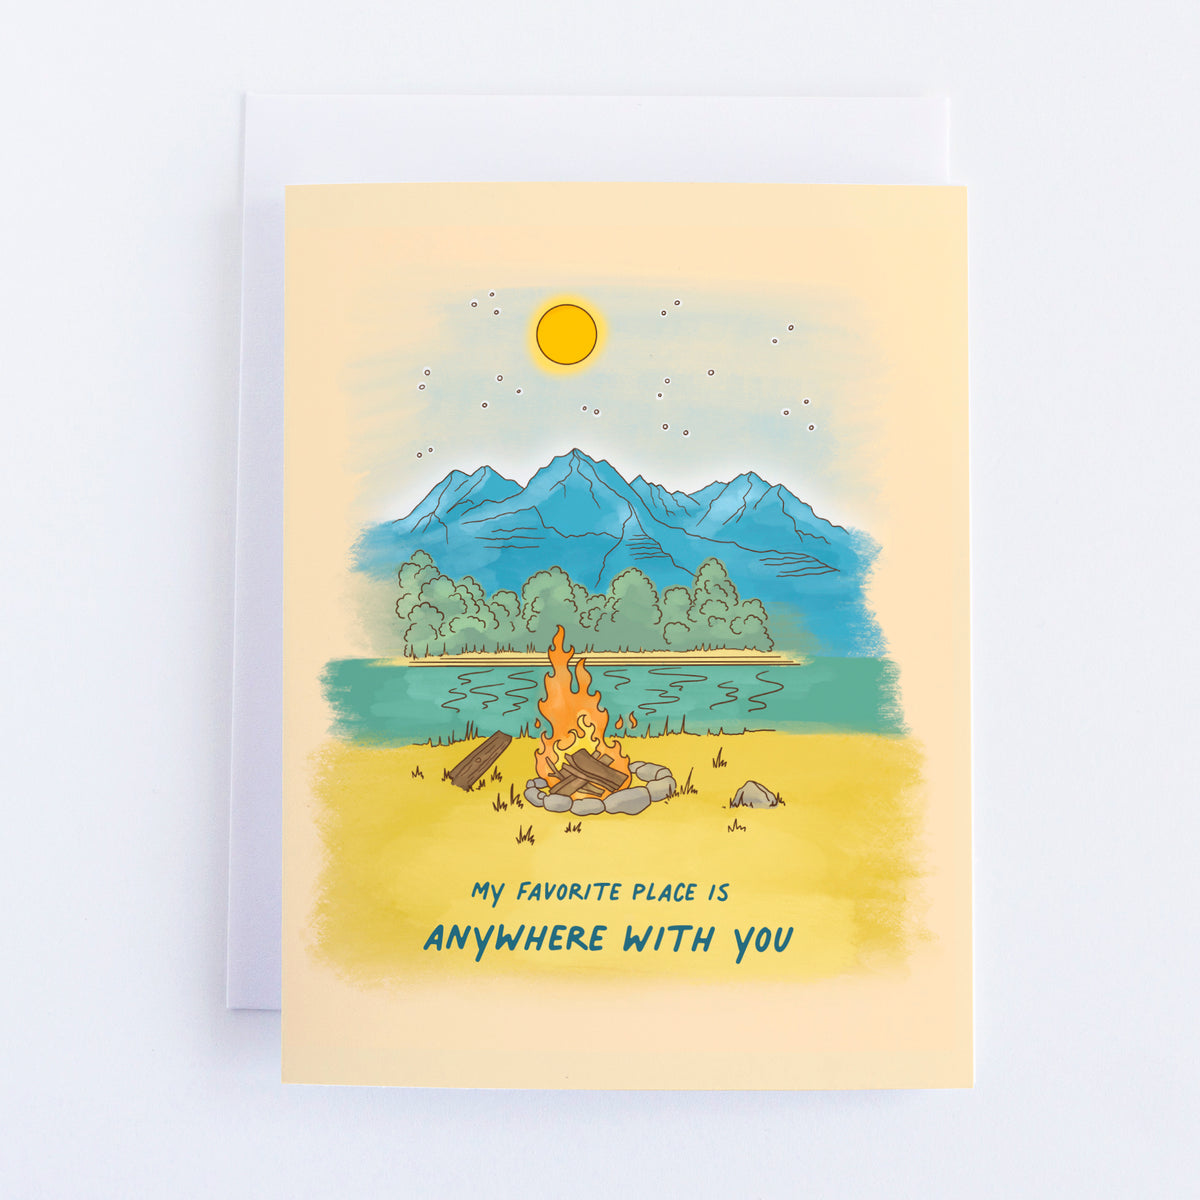 A greeting card with a campfire in a fire ring burning in a little field next to a lake with a forest and mountains in the background. With a beige background.